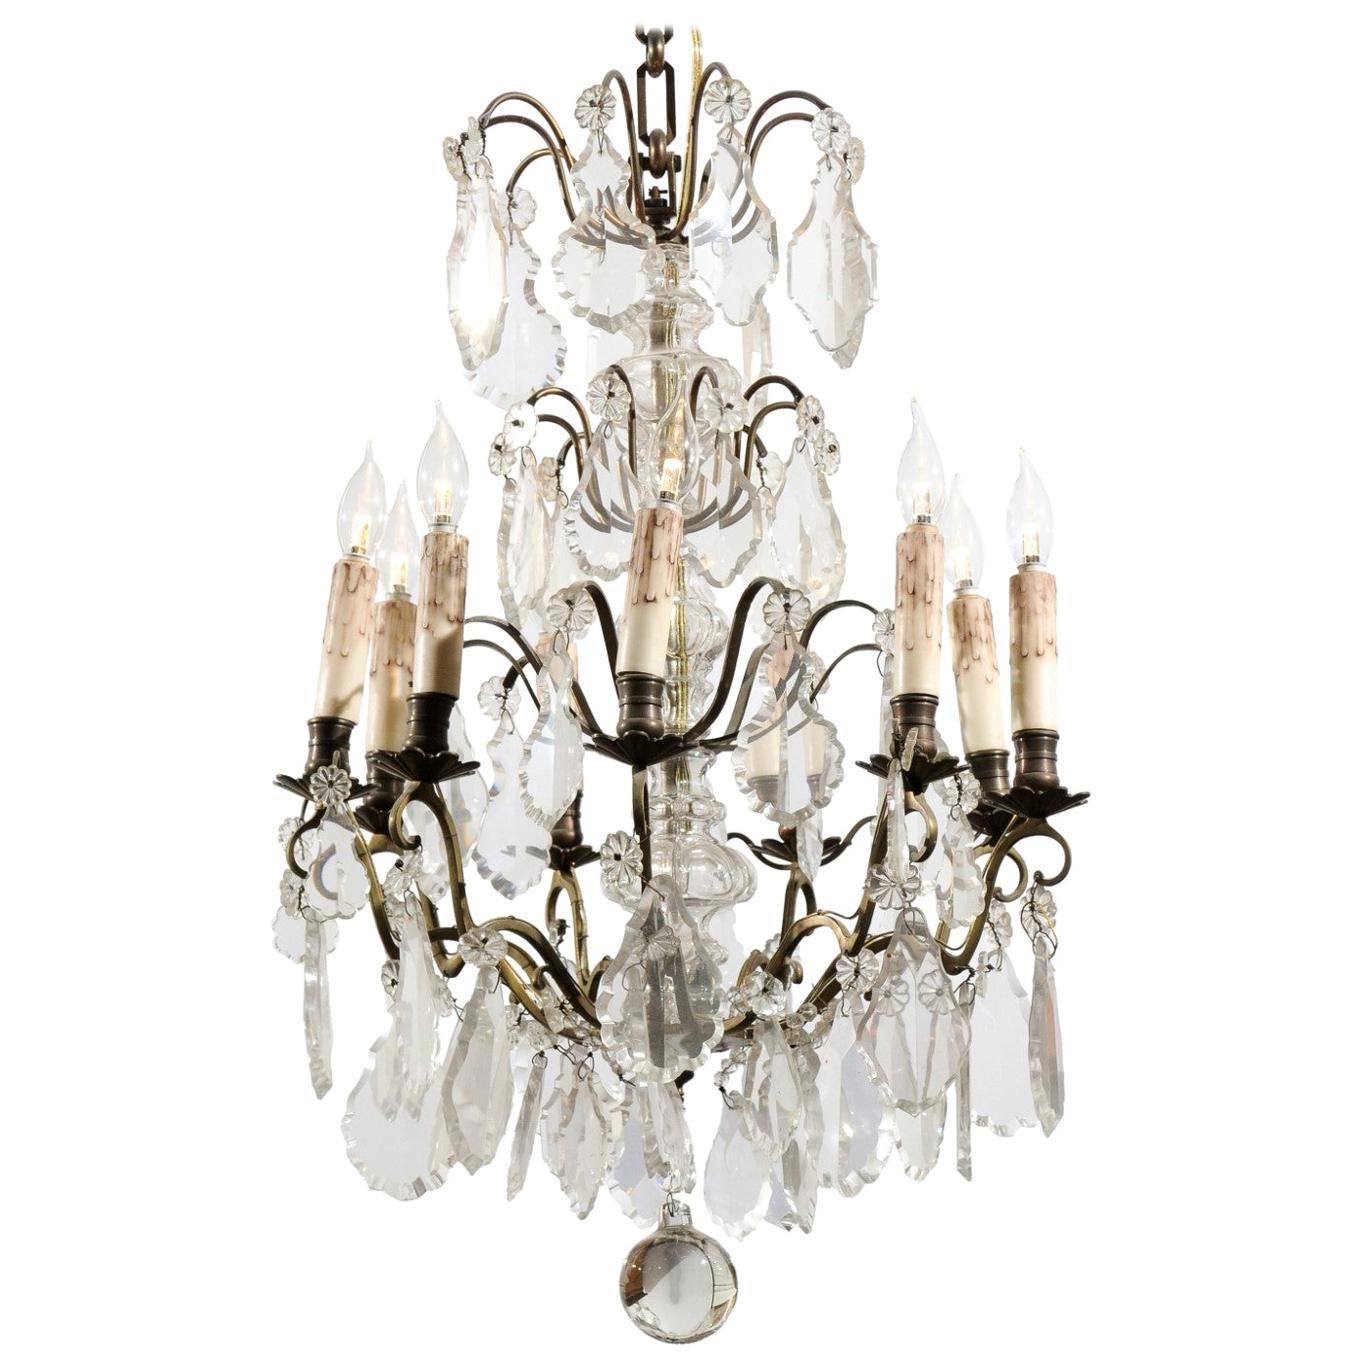 French Nine-Light Crystal and Brass Chandelier with Pendeloques, circa 1900